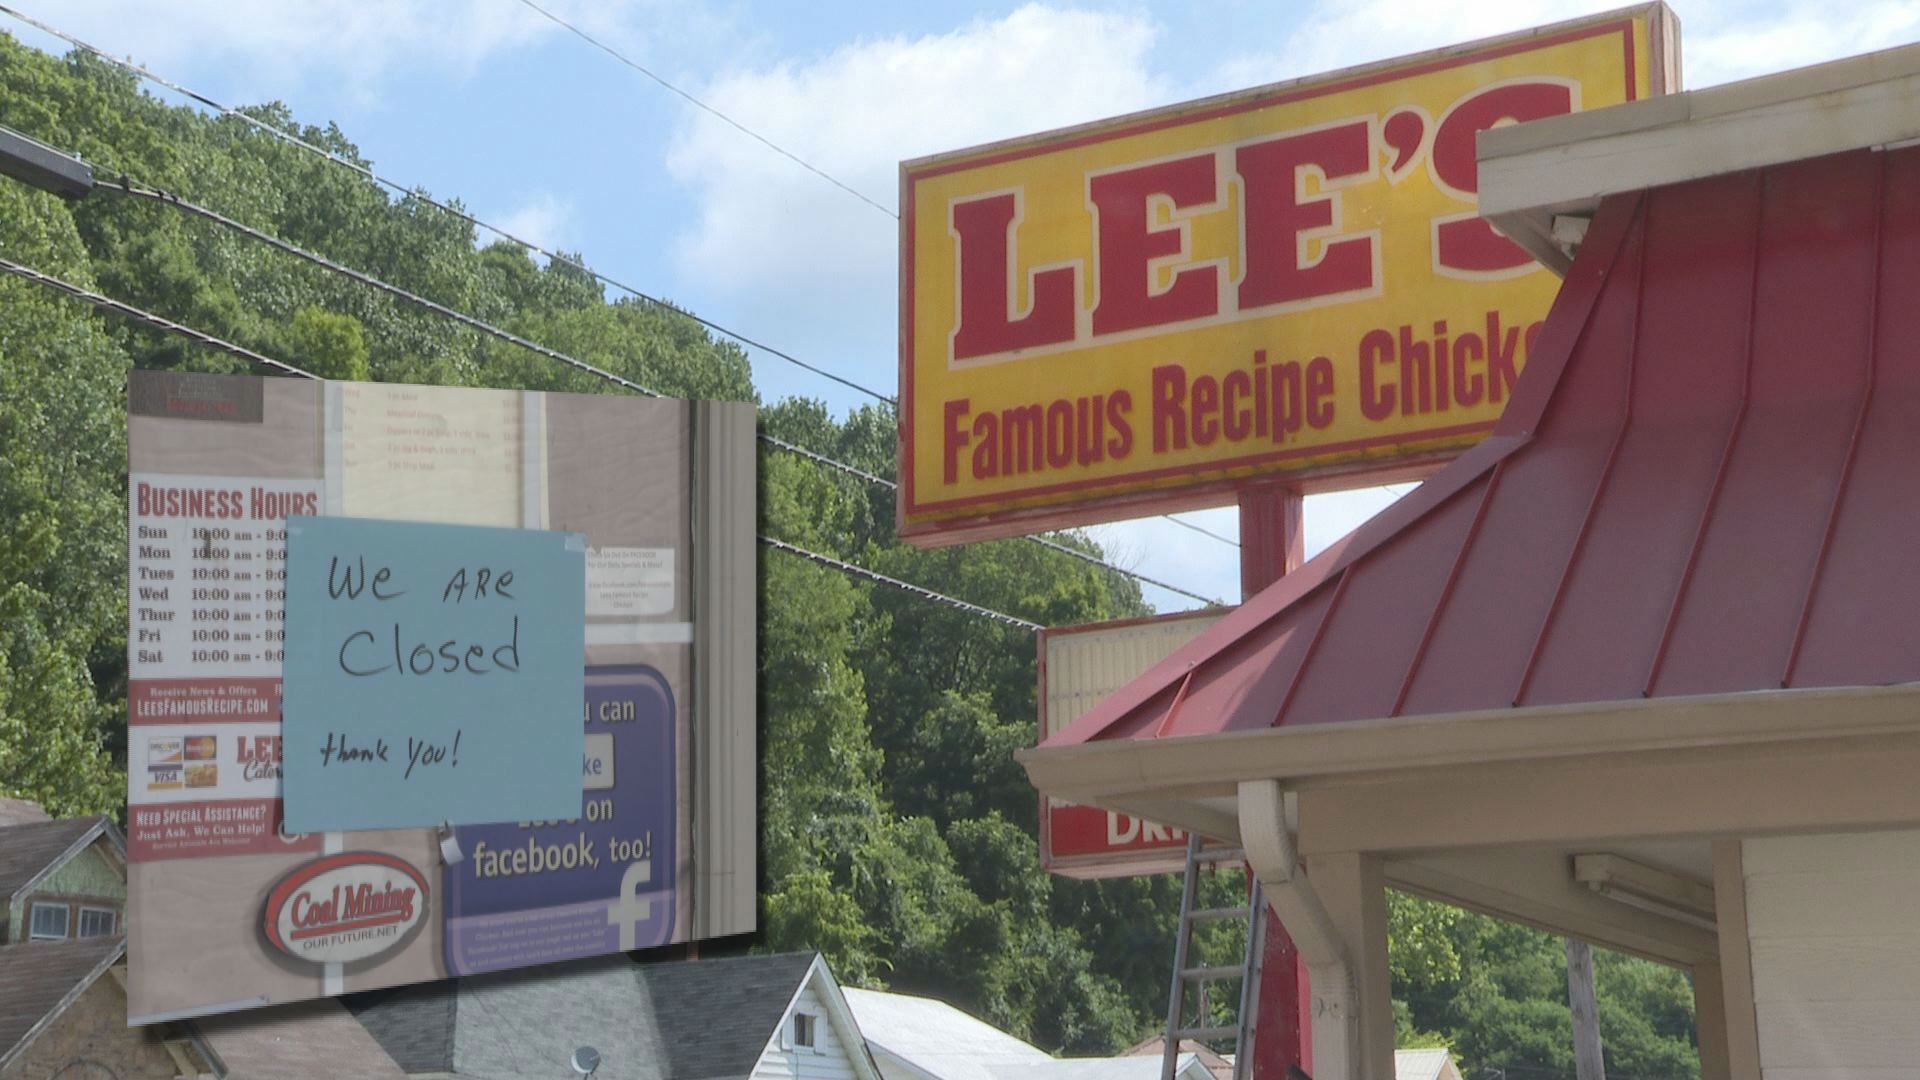 Lee's Famous Recipe on East Main St. in Hazard suddenly closes, is for sale